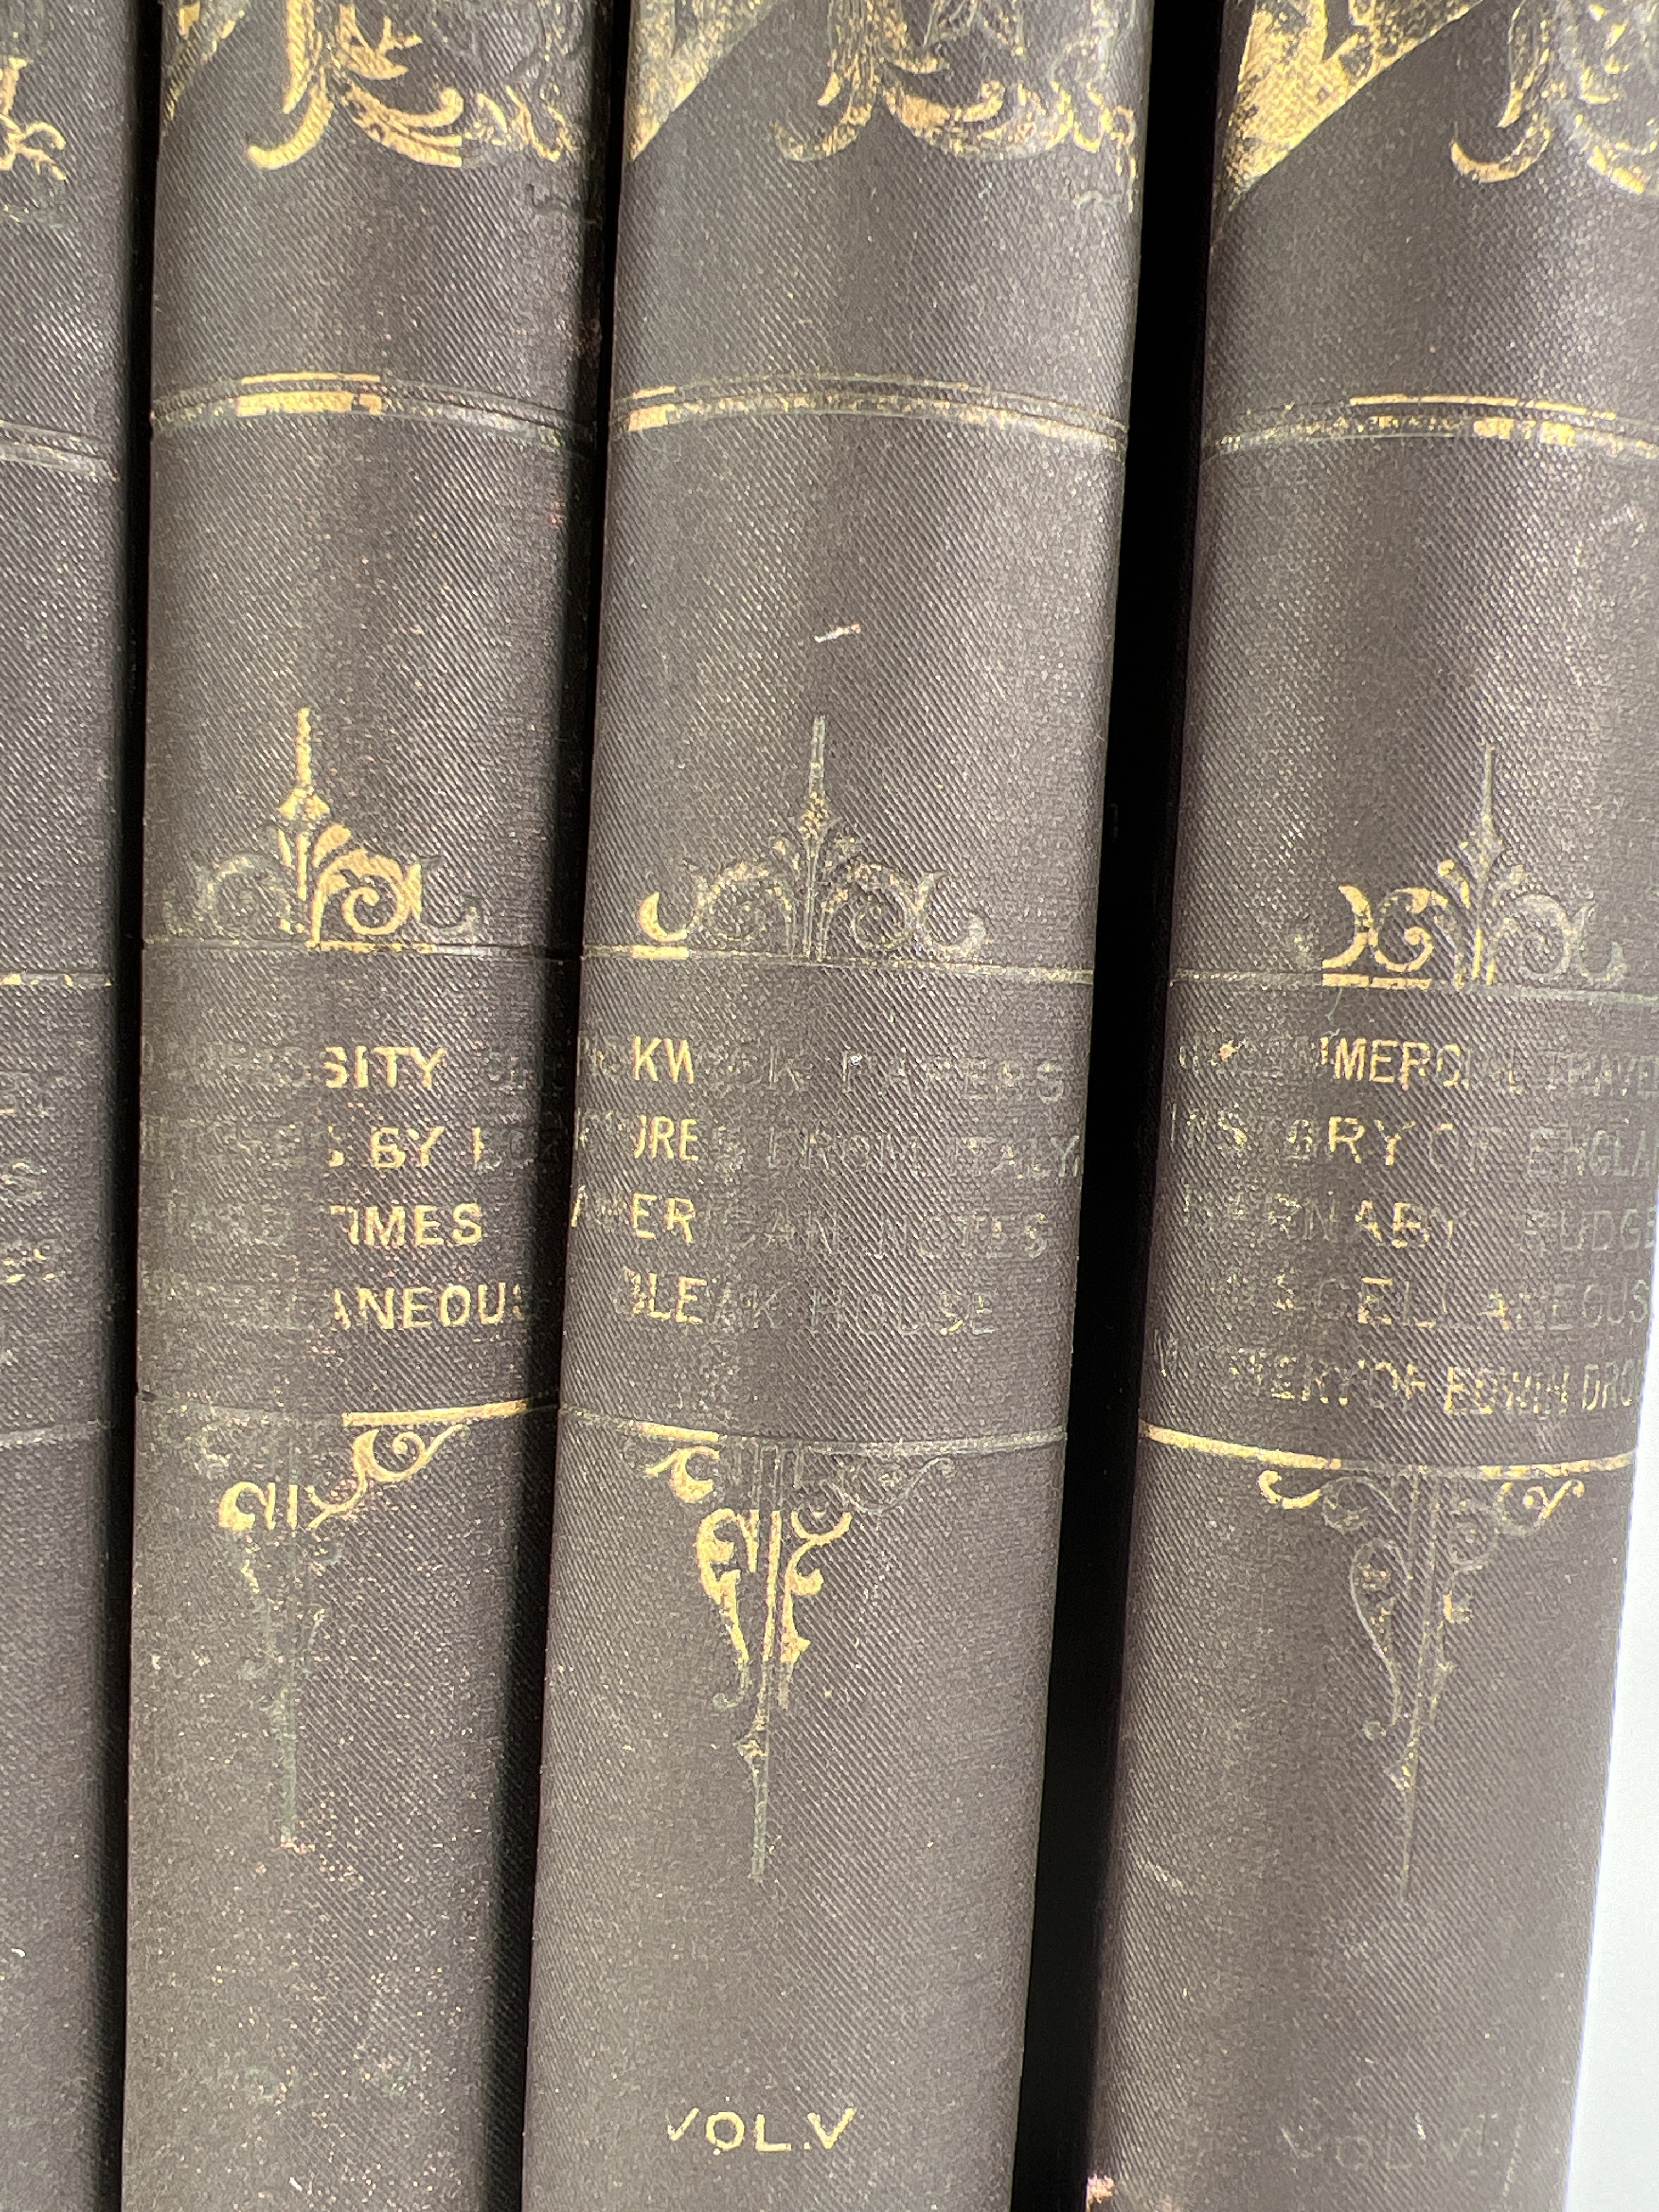 6 Vol Colliers Unabridged Ed The Works Of Charles Dickens image 3